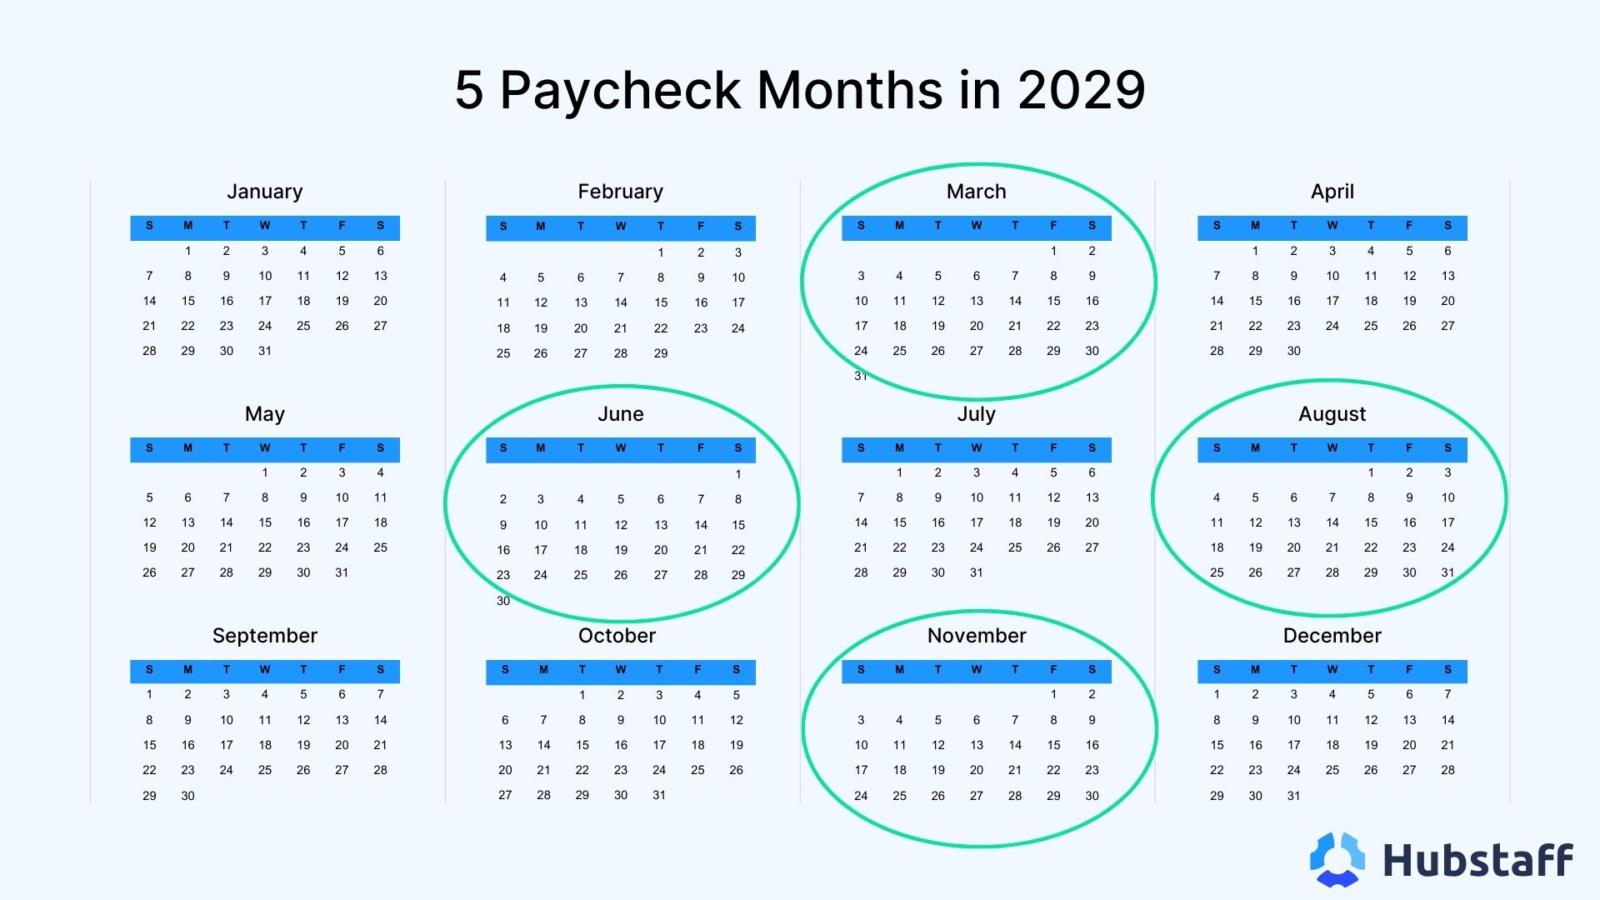 Five paycheck months in 2029